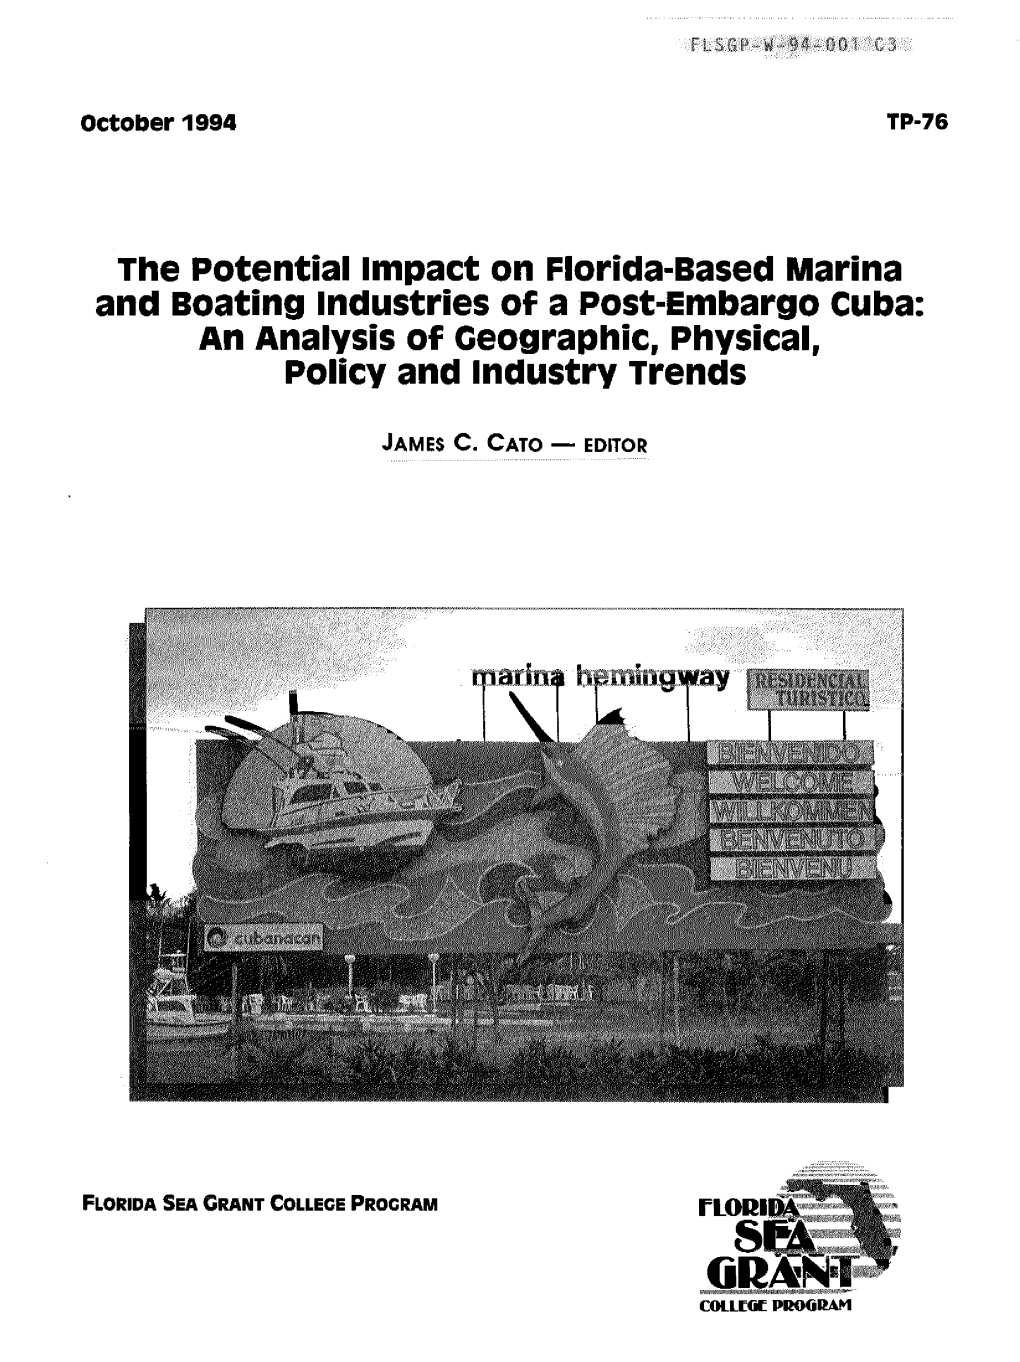 An Analysis of Geographic, Physical, Policy and Industry Trends